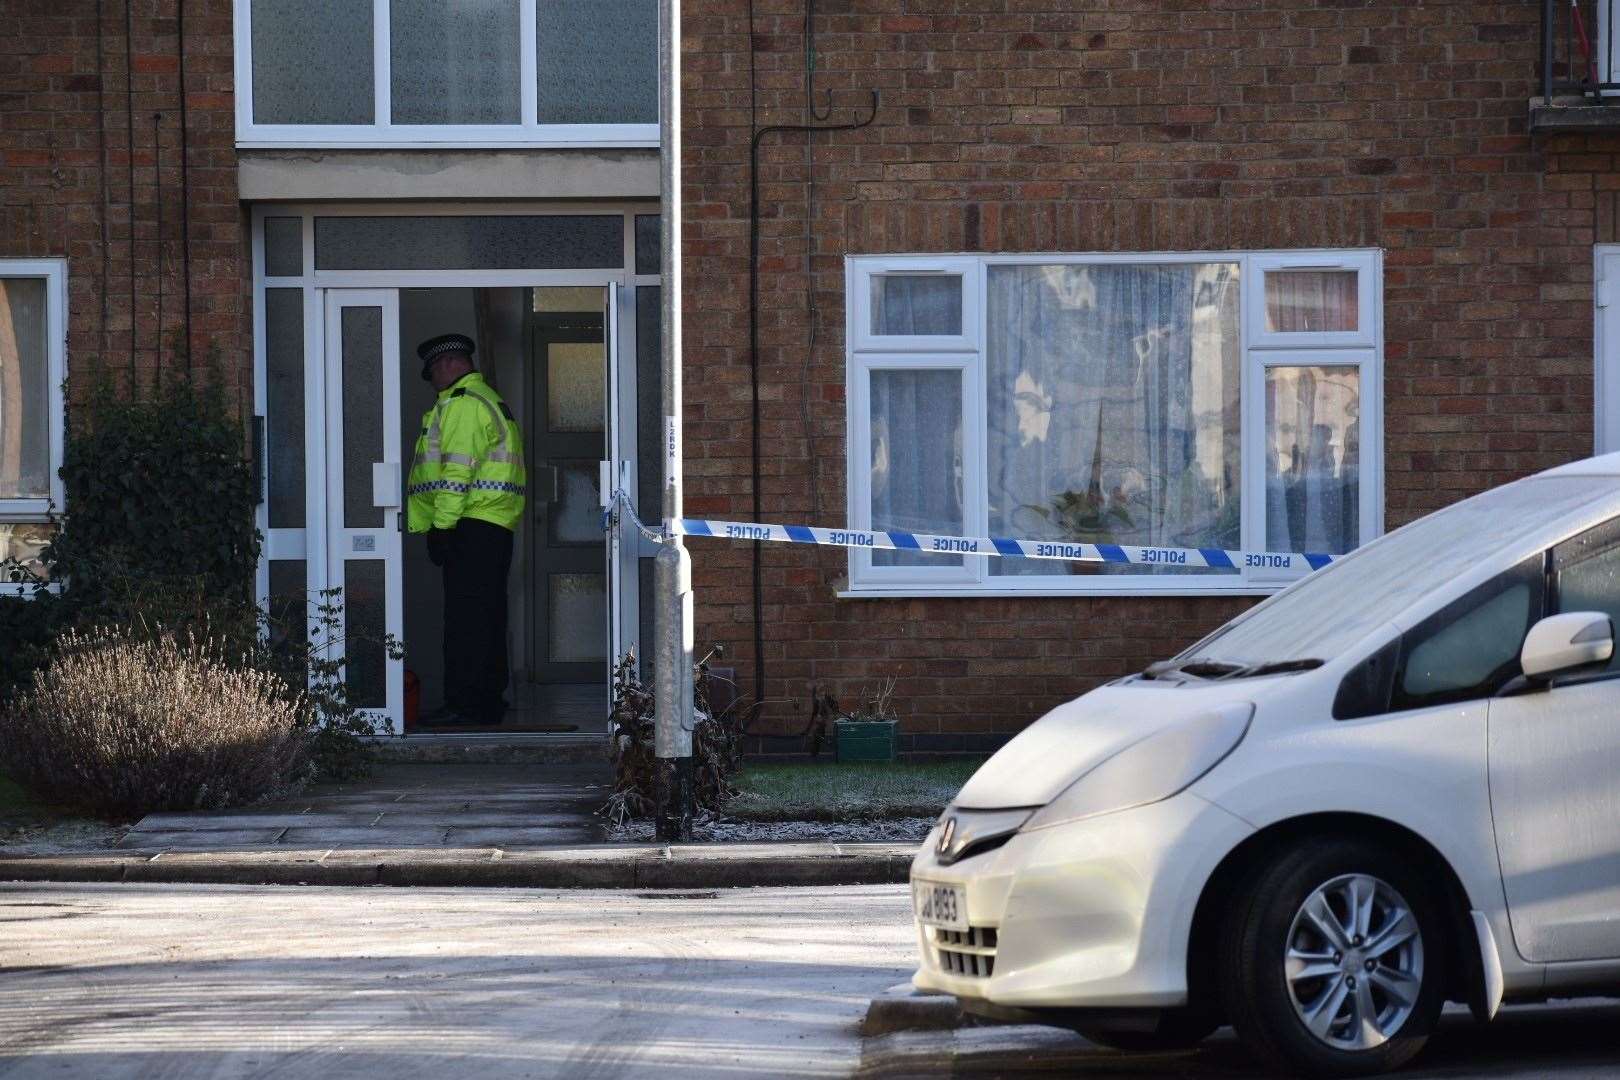 Forensic officers have been seen examining a ground floor flat. (Matthew Cooper/PA)